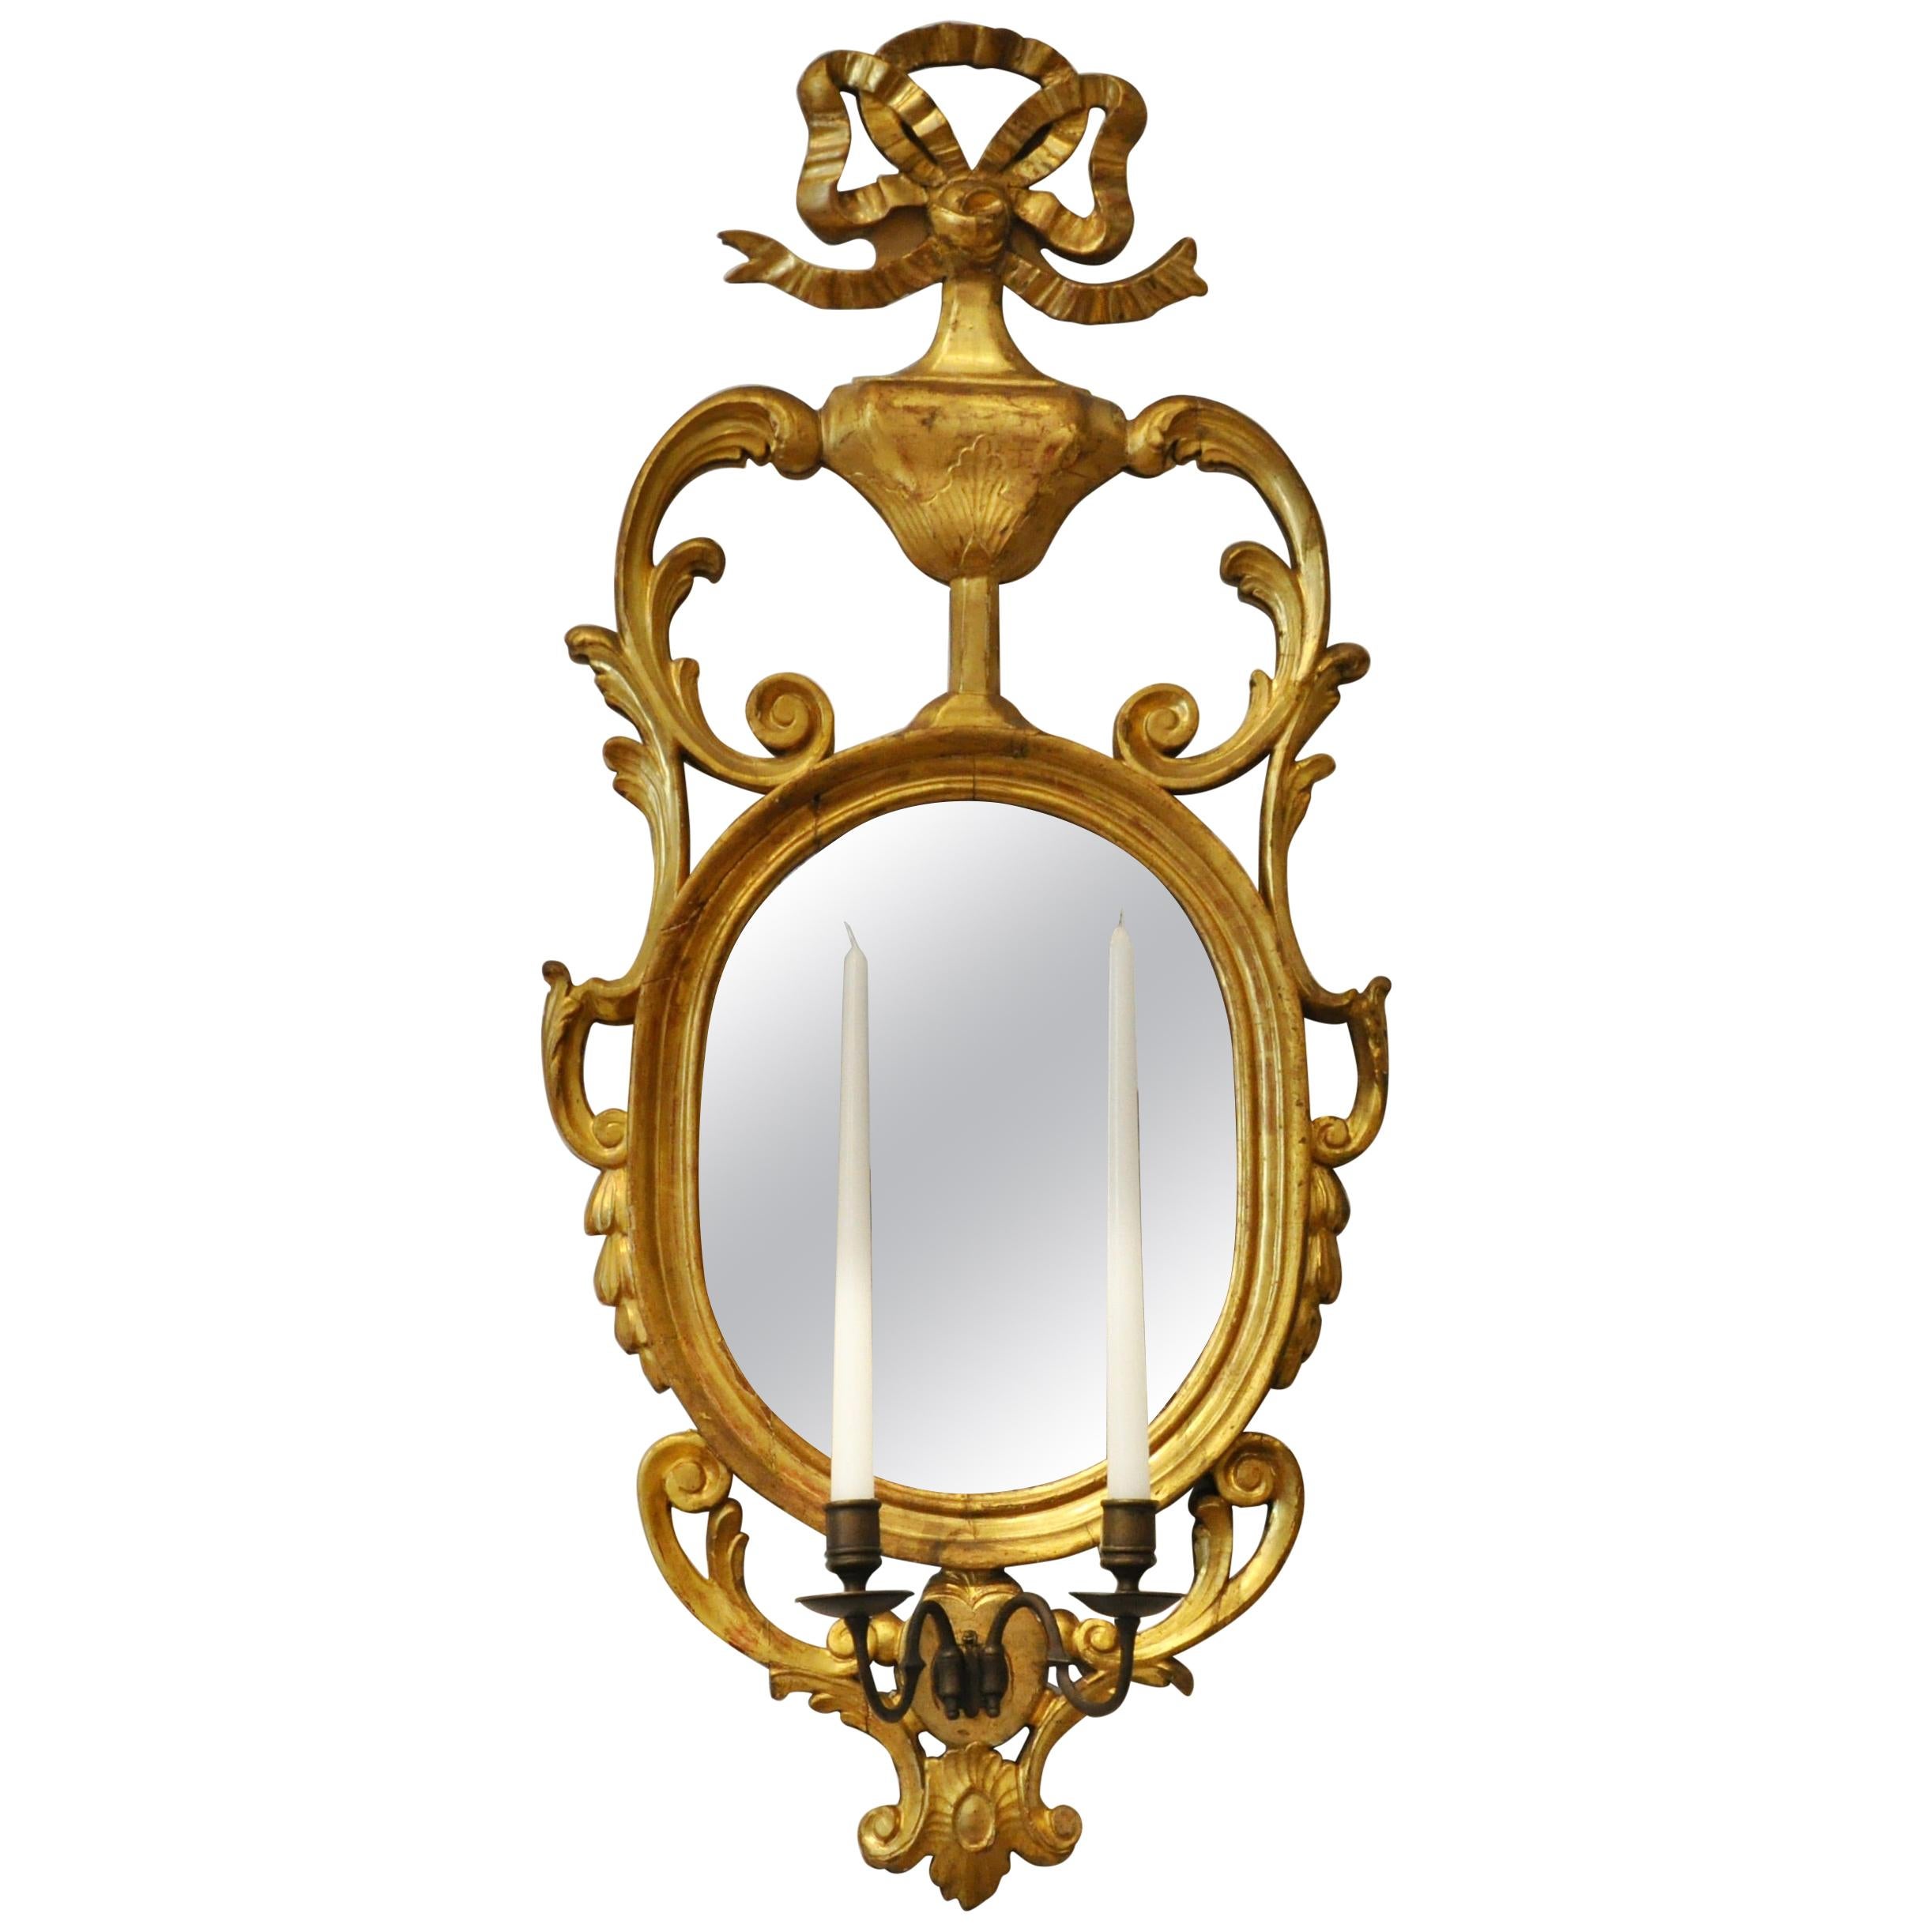 Pair of Early 19th Century Continental Neoclassical Giltwood Sconce Mirrors For Sale 3